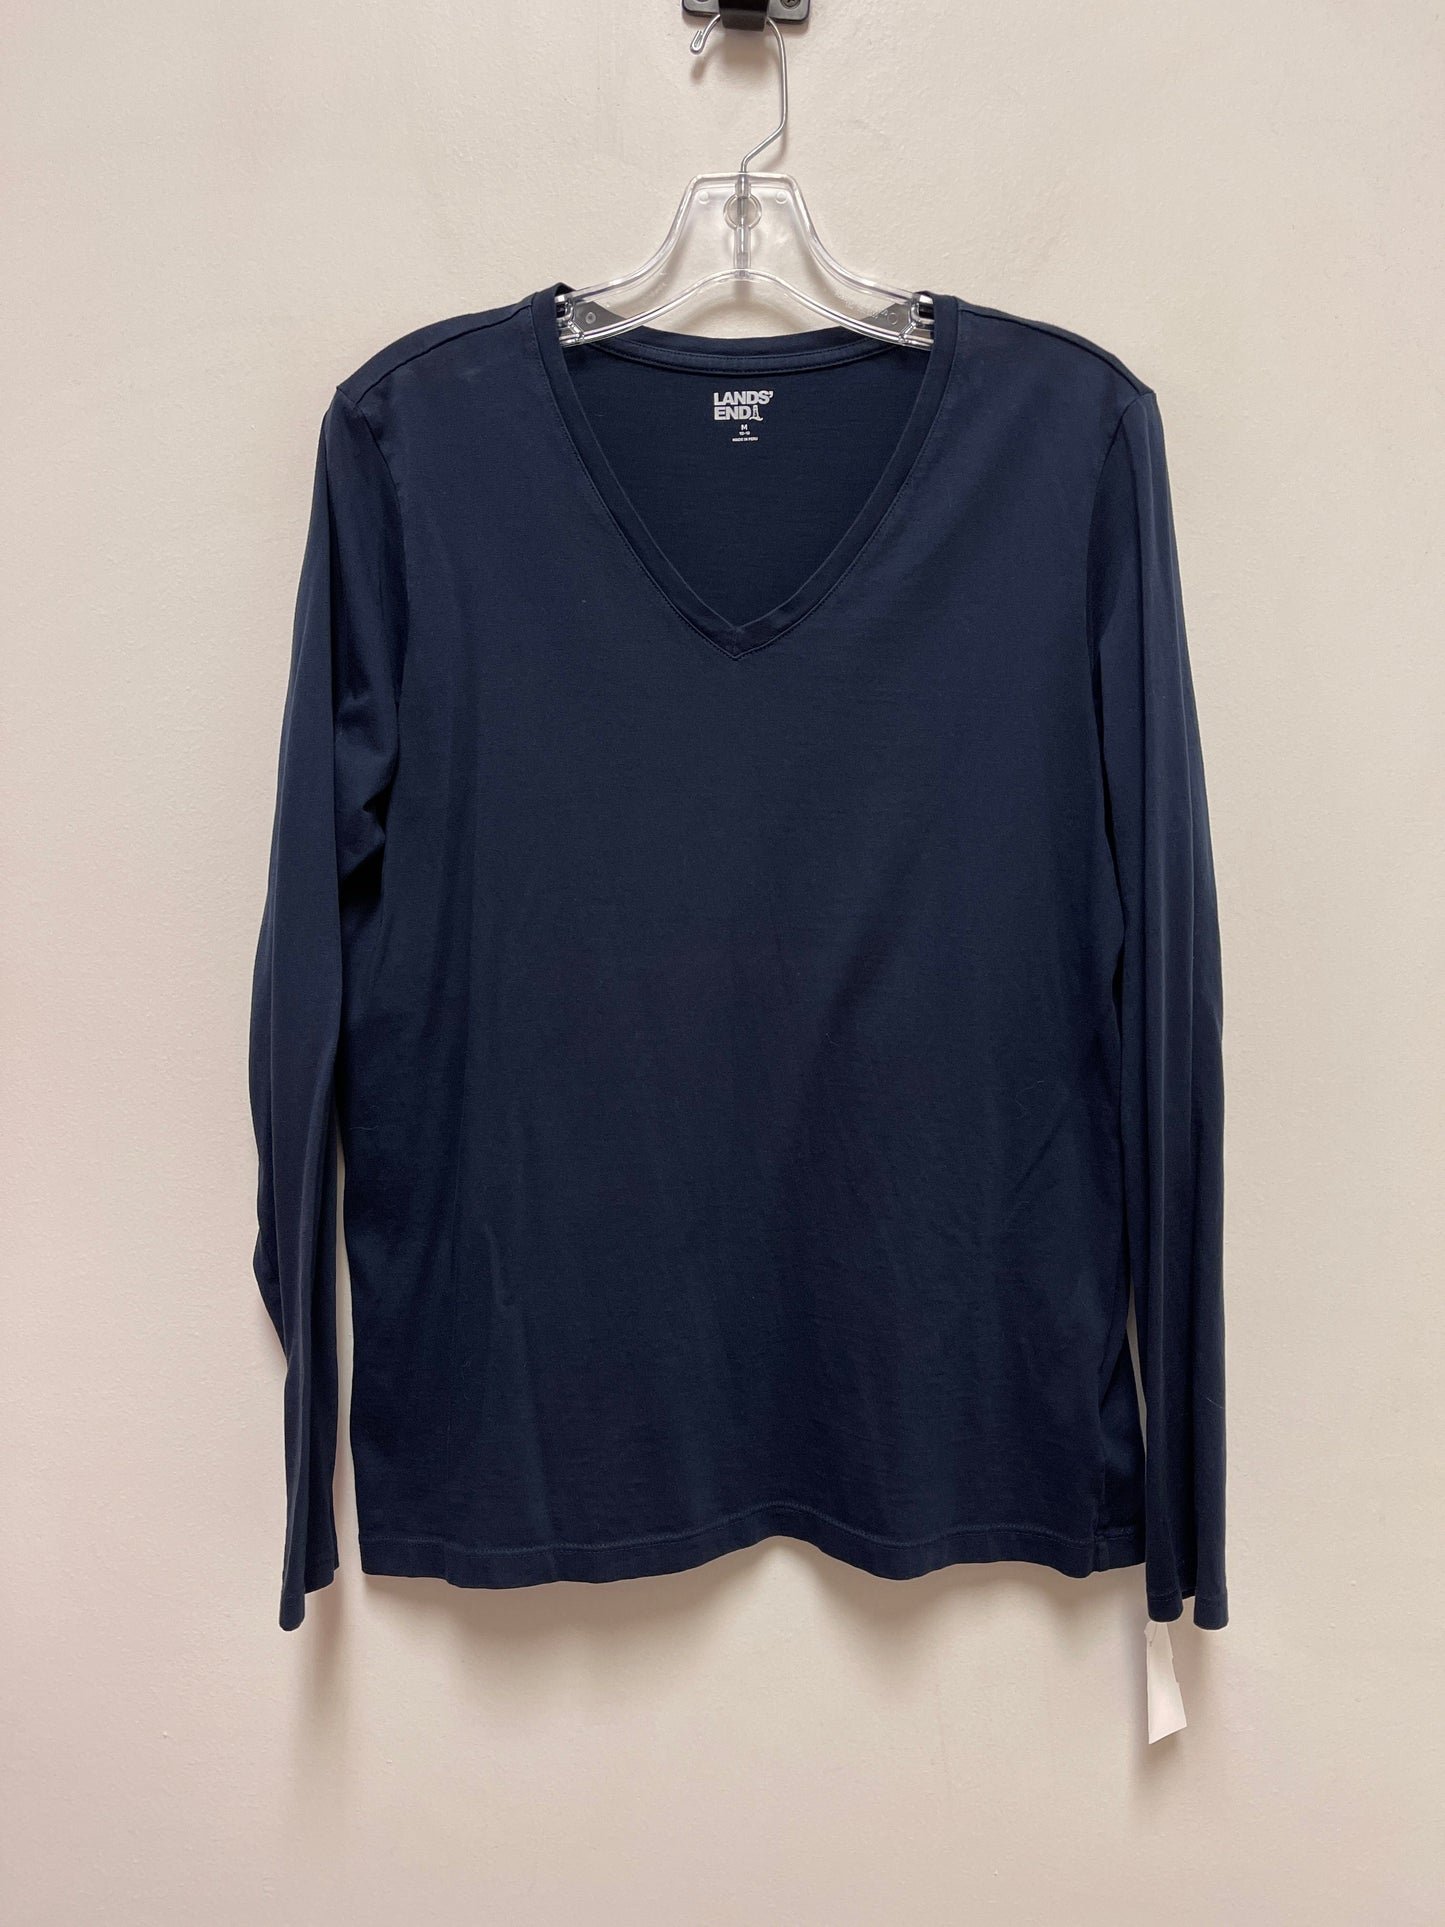 Navy Top Long Sleeve Lands End, Size M